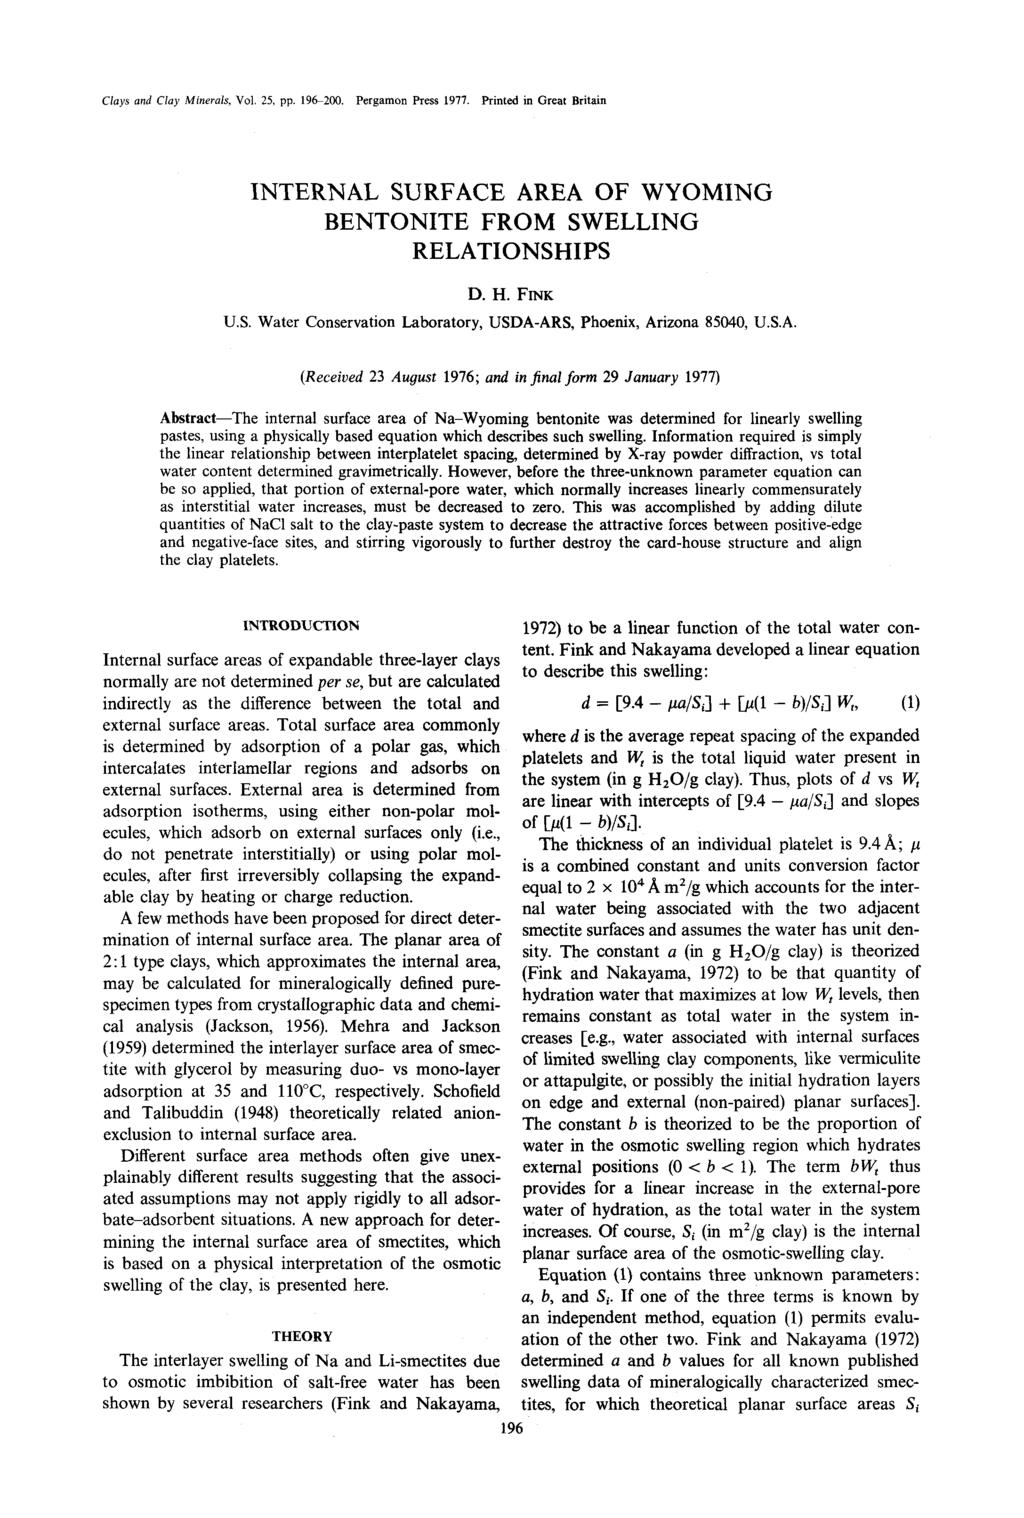 Clays and Clay Minerals, Vol. 25, pp. 196-200. Pergamon Press 1977. Printed in Great Britain INTERNAL SURFACE AREA OF WYOMING BENTONITE FROM SWELLING RELATIONSHIPS D. H. FI~K U.S. Water Conservation Laboratory, USDA-ARS, Phoenix, Arizona 85040, U.